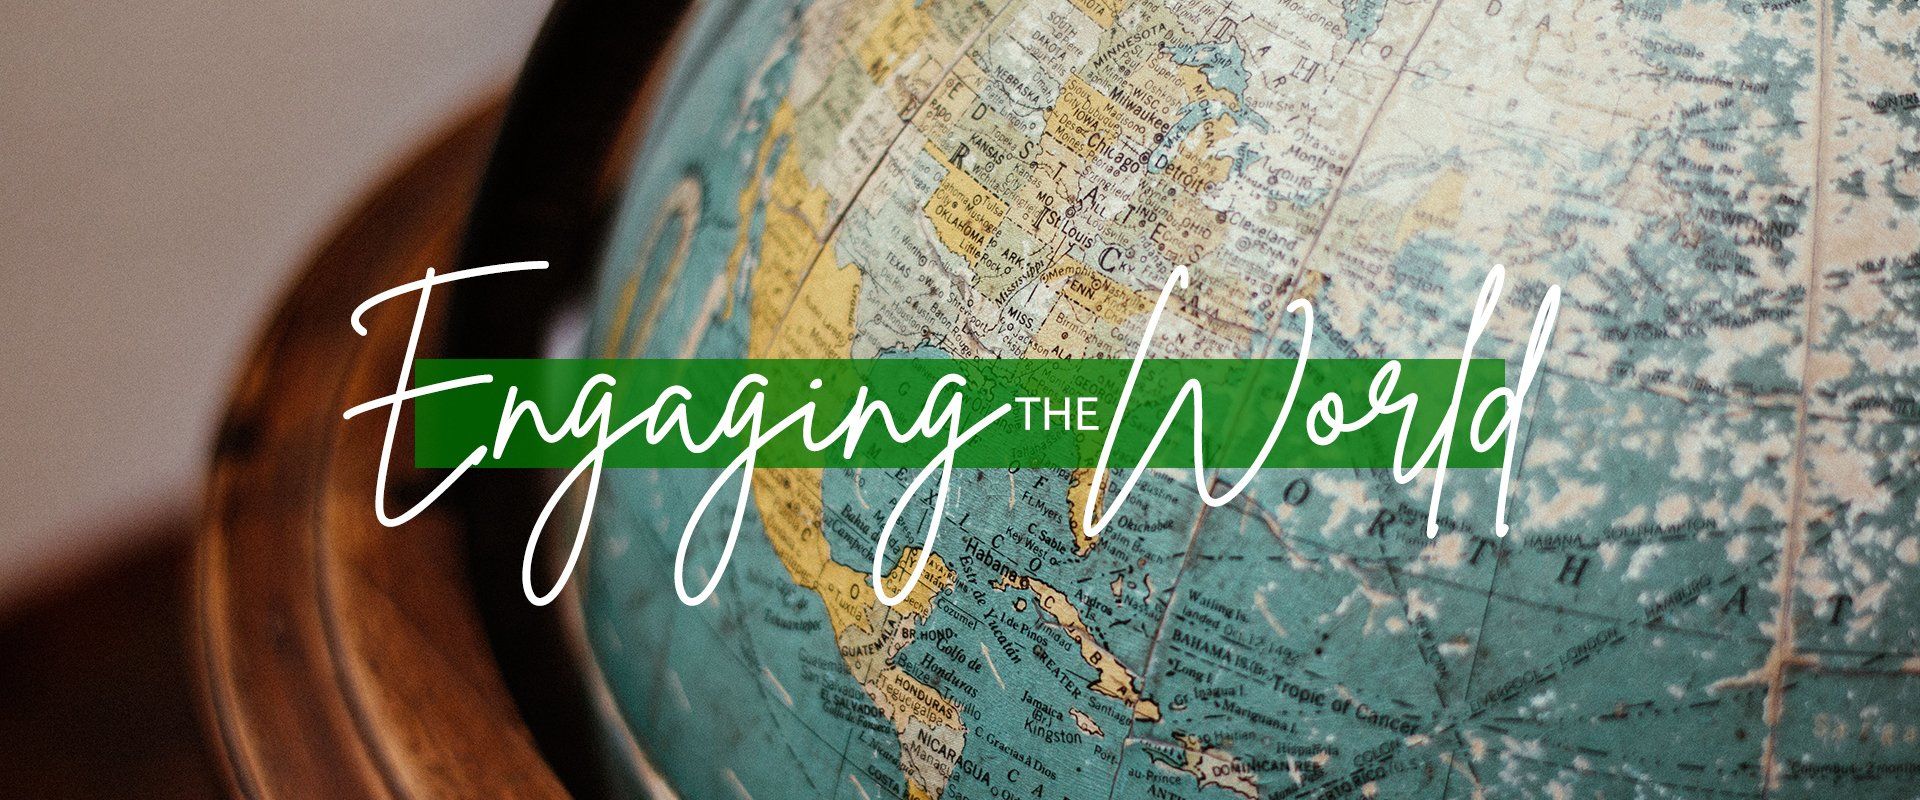 Engaging the World